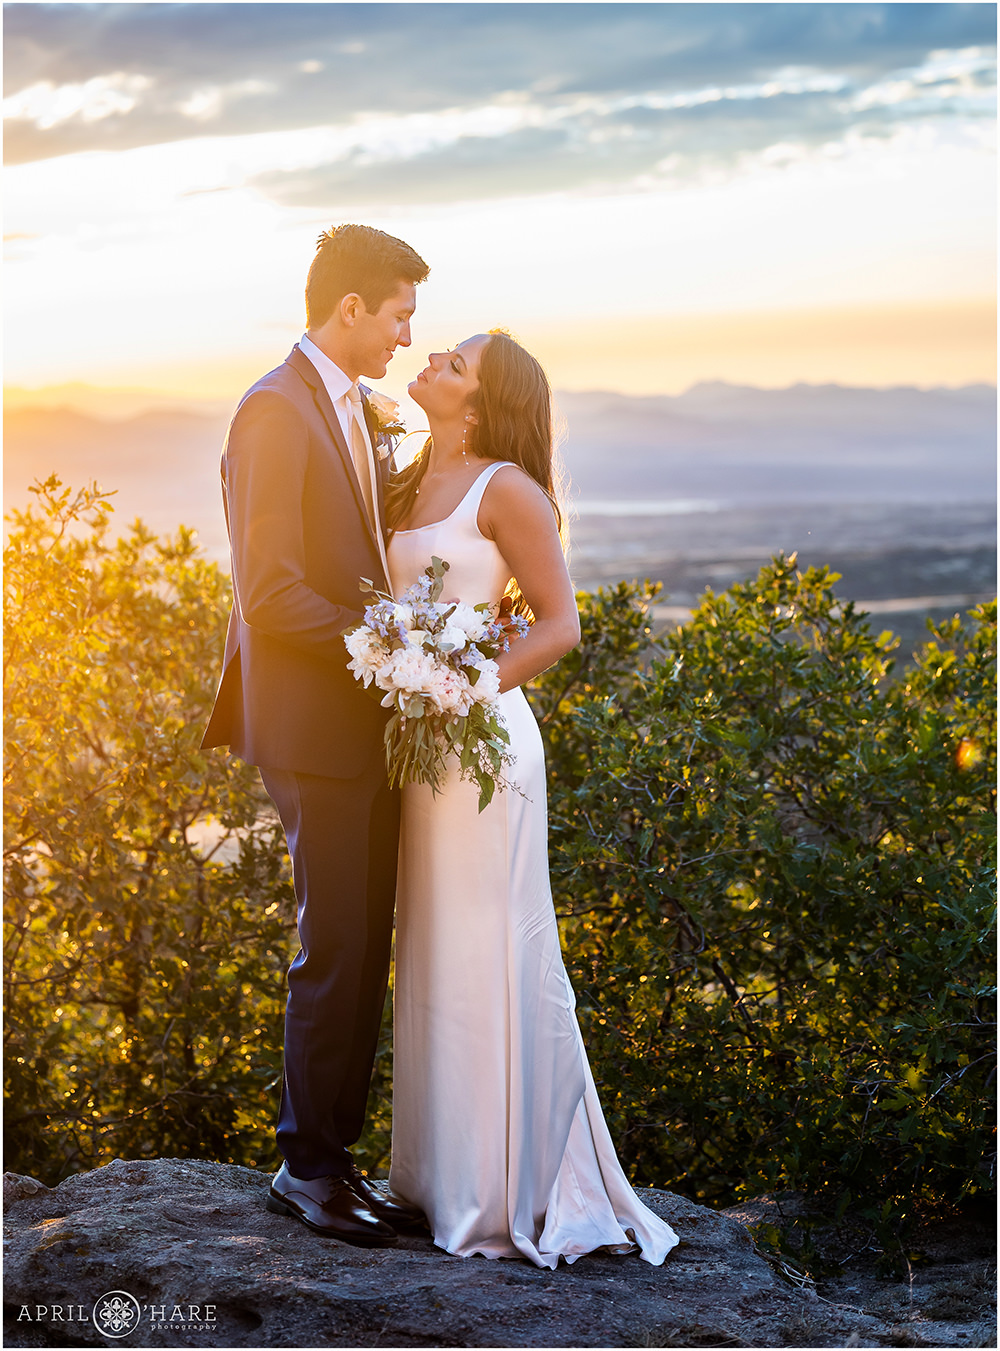 Warm glowing light on bride and groom as the sun sets at their castle wedding in Colorado